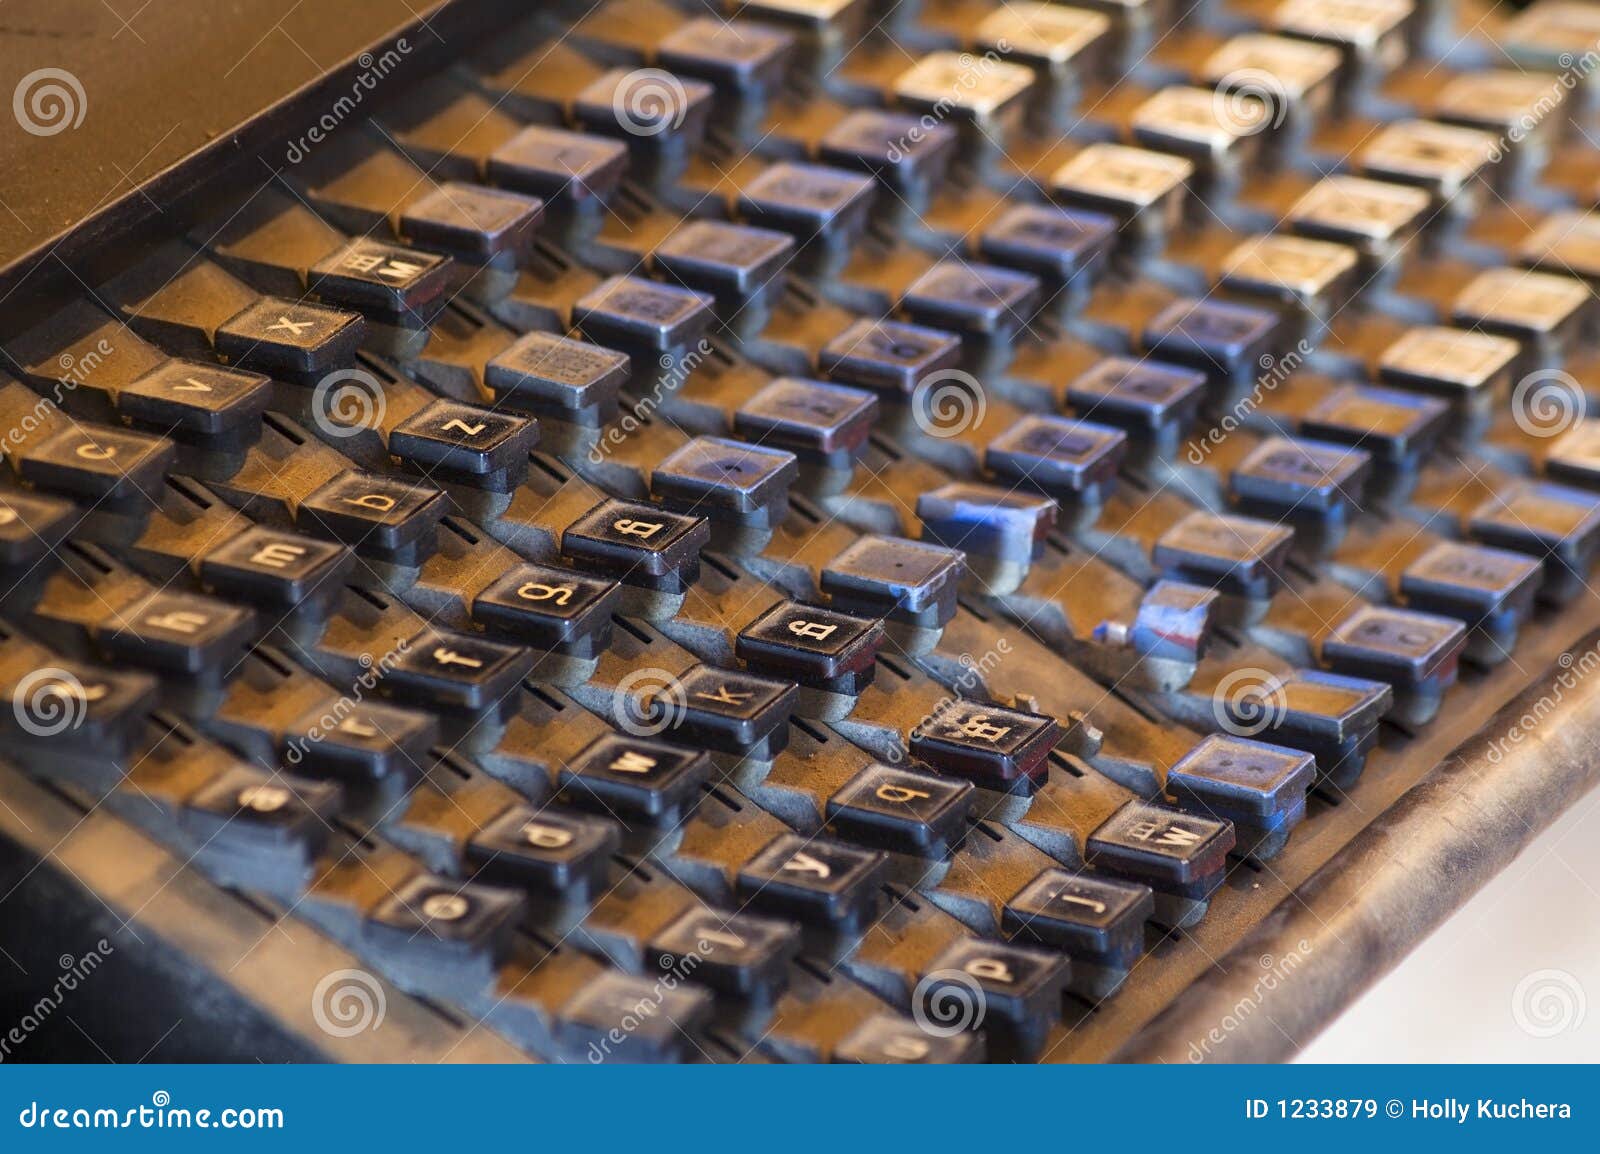 vintage printing press keyboard covered in dust and grit